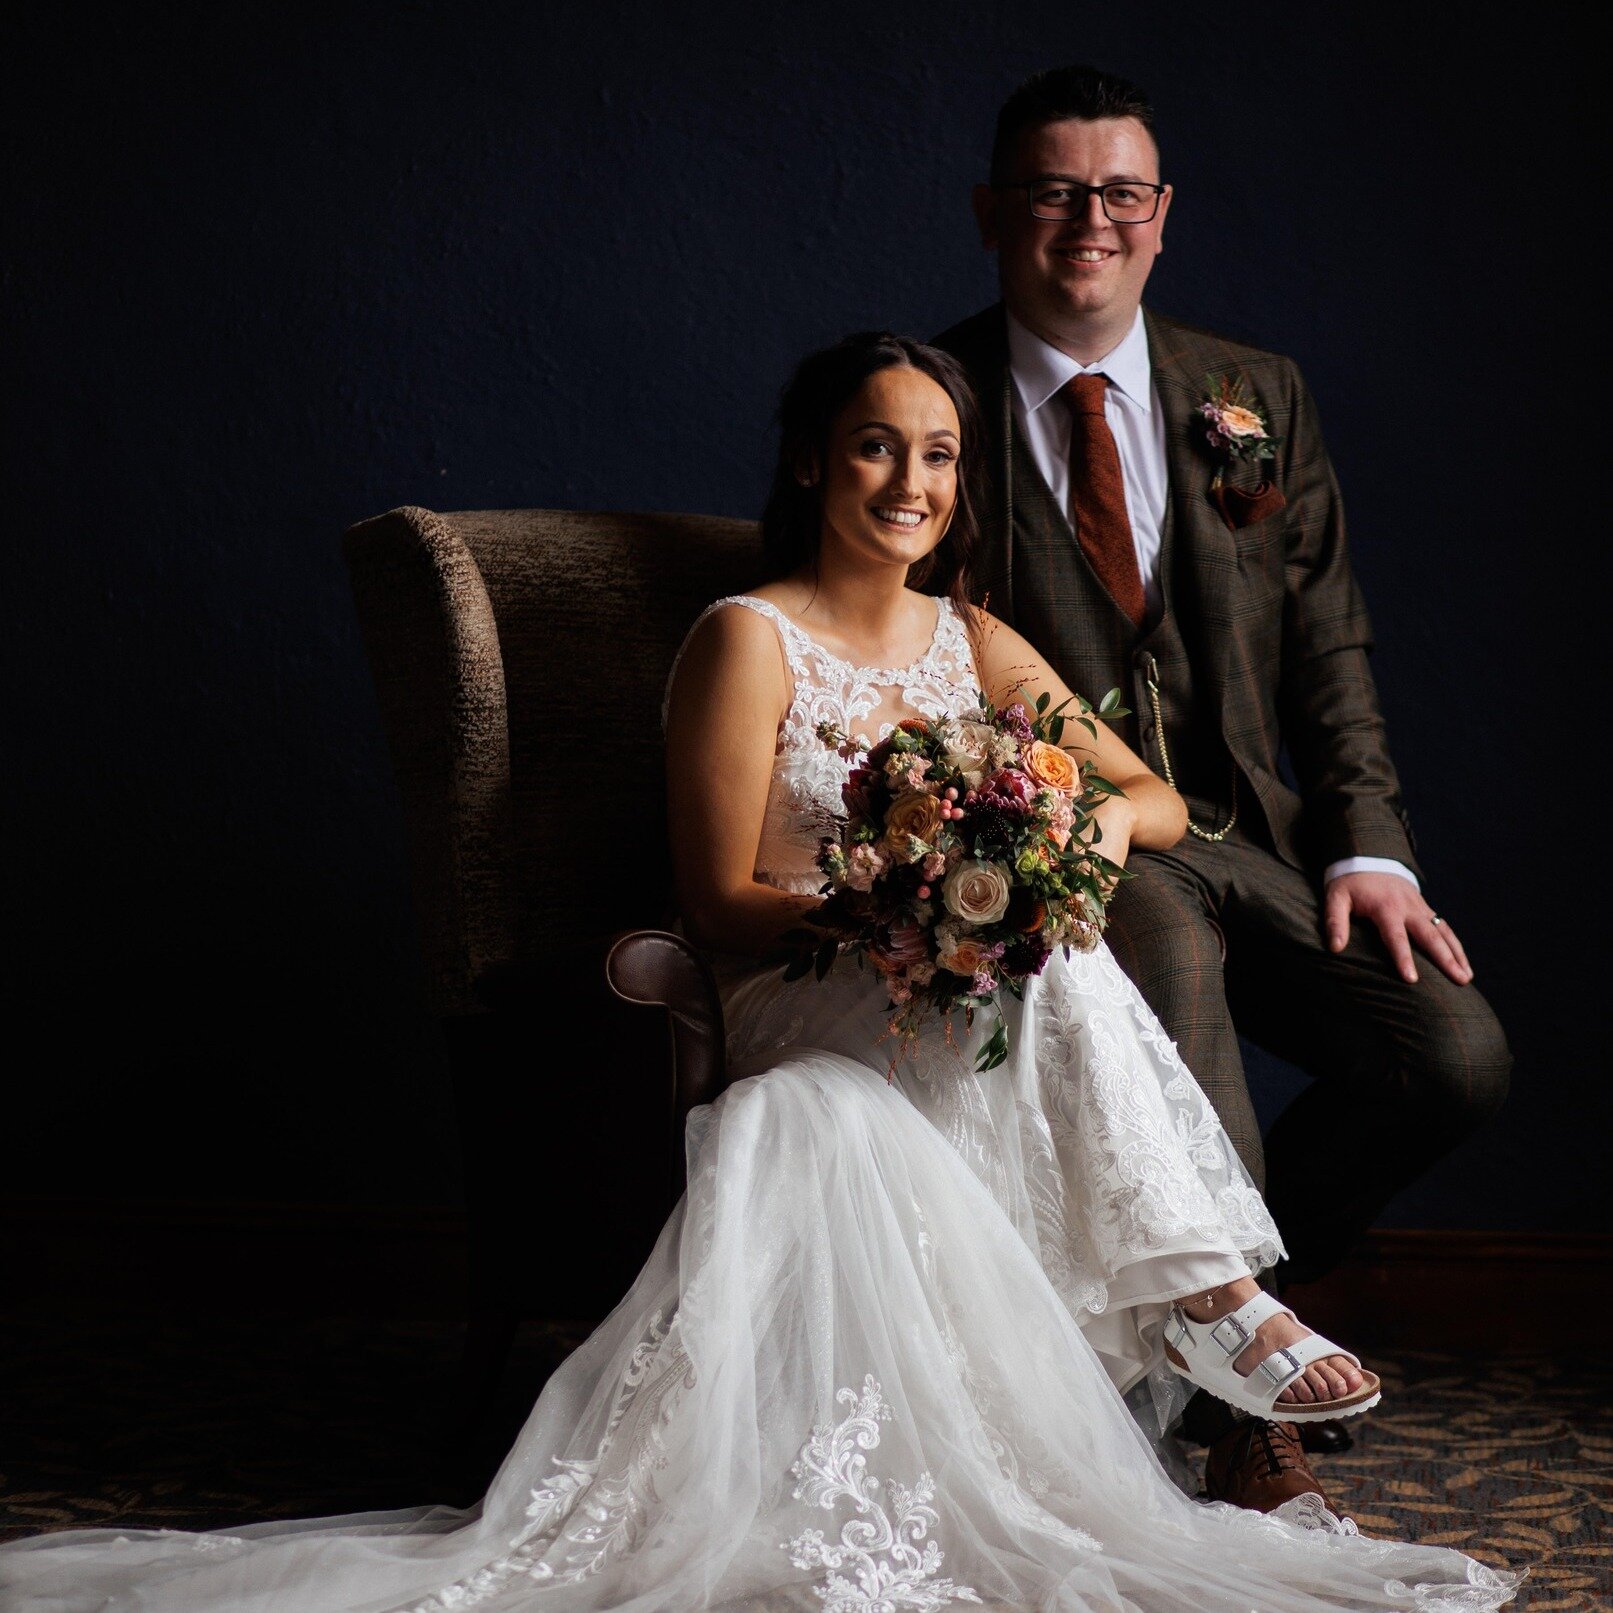 A wet day for most of the wedding day but @dunadryhotelandgardens  has some great internal locations for wedding photos

Wedding suppliers
Wedding dress - White Gold Bridal 
Menswear - Freddie Hatchet 
Florist - Ivy Lane Floral Design Studio 
Hair -@